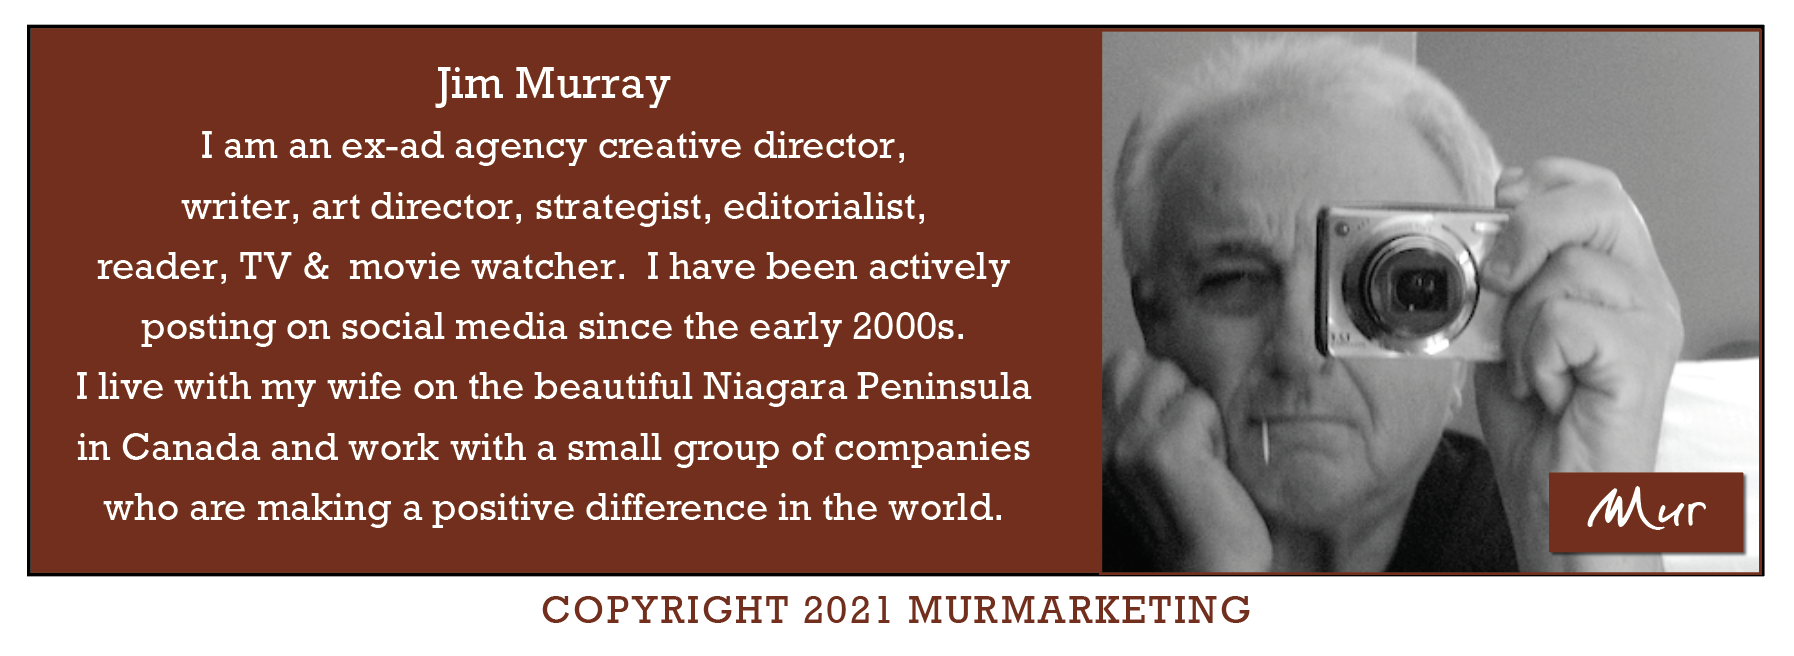 Jim Murray
I am an ex-ad agency creative director,
writer, art director, strategist, editorialist,
reader, TV & movie watcher. I have been actively

posting on social media since the early 2000s.

I live with my wife on the beautiful Niagara Peninsula

in Canada and work with a small group of companies

who are making a positive difference in the world.

 

COPYRIGHT 2021 MURMARKETING